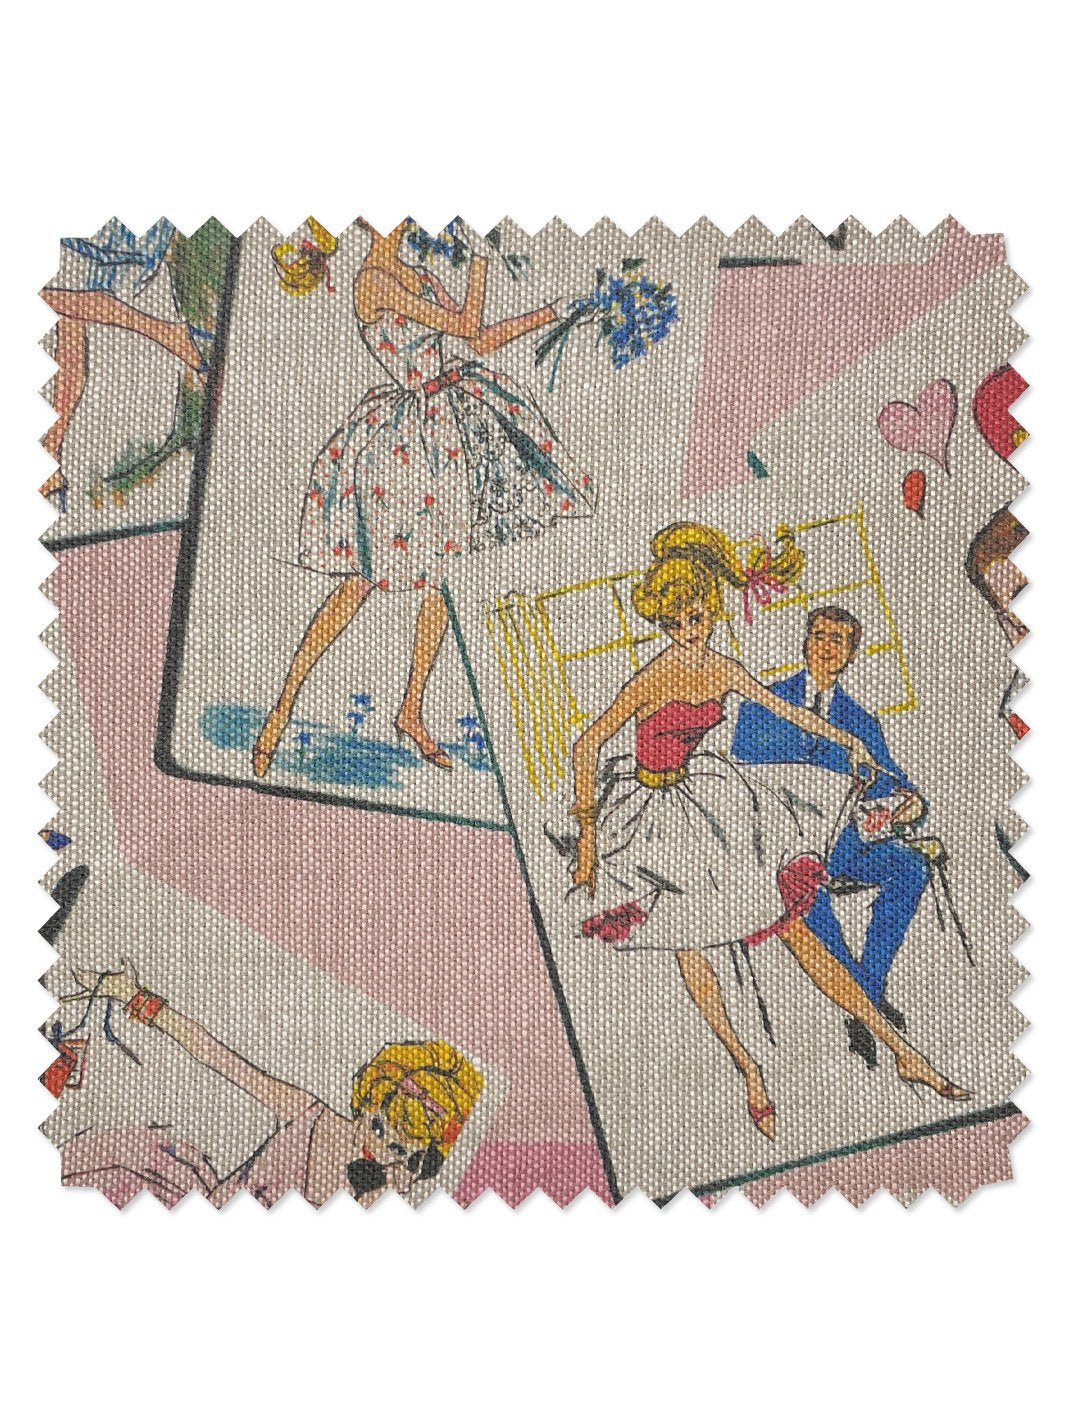 'Fabric by the Yard - Barbie™ Trading Cards - Pink